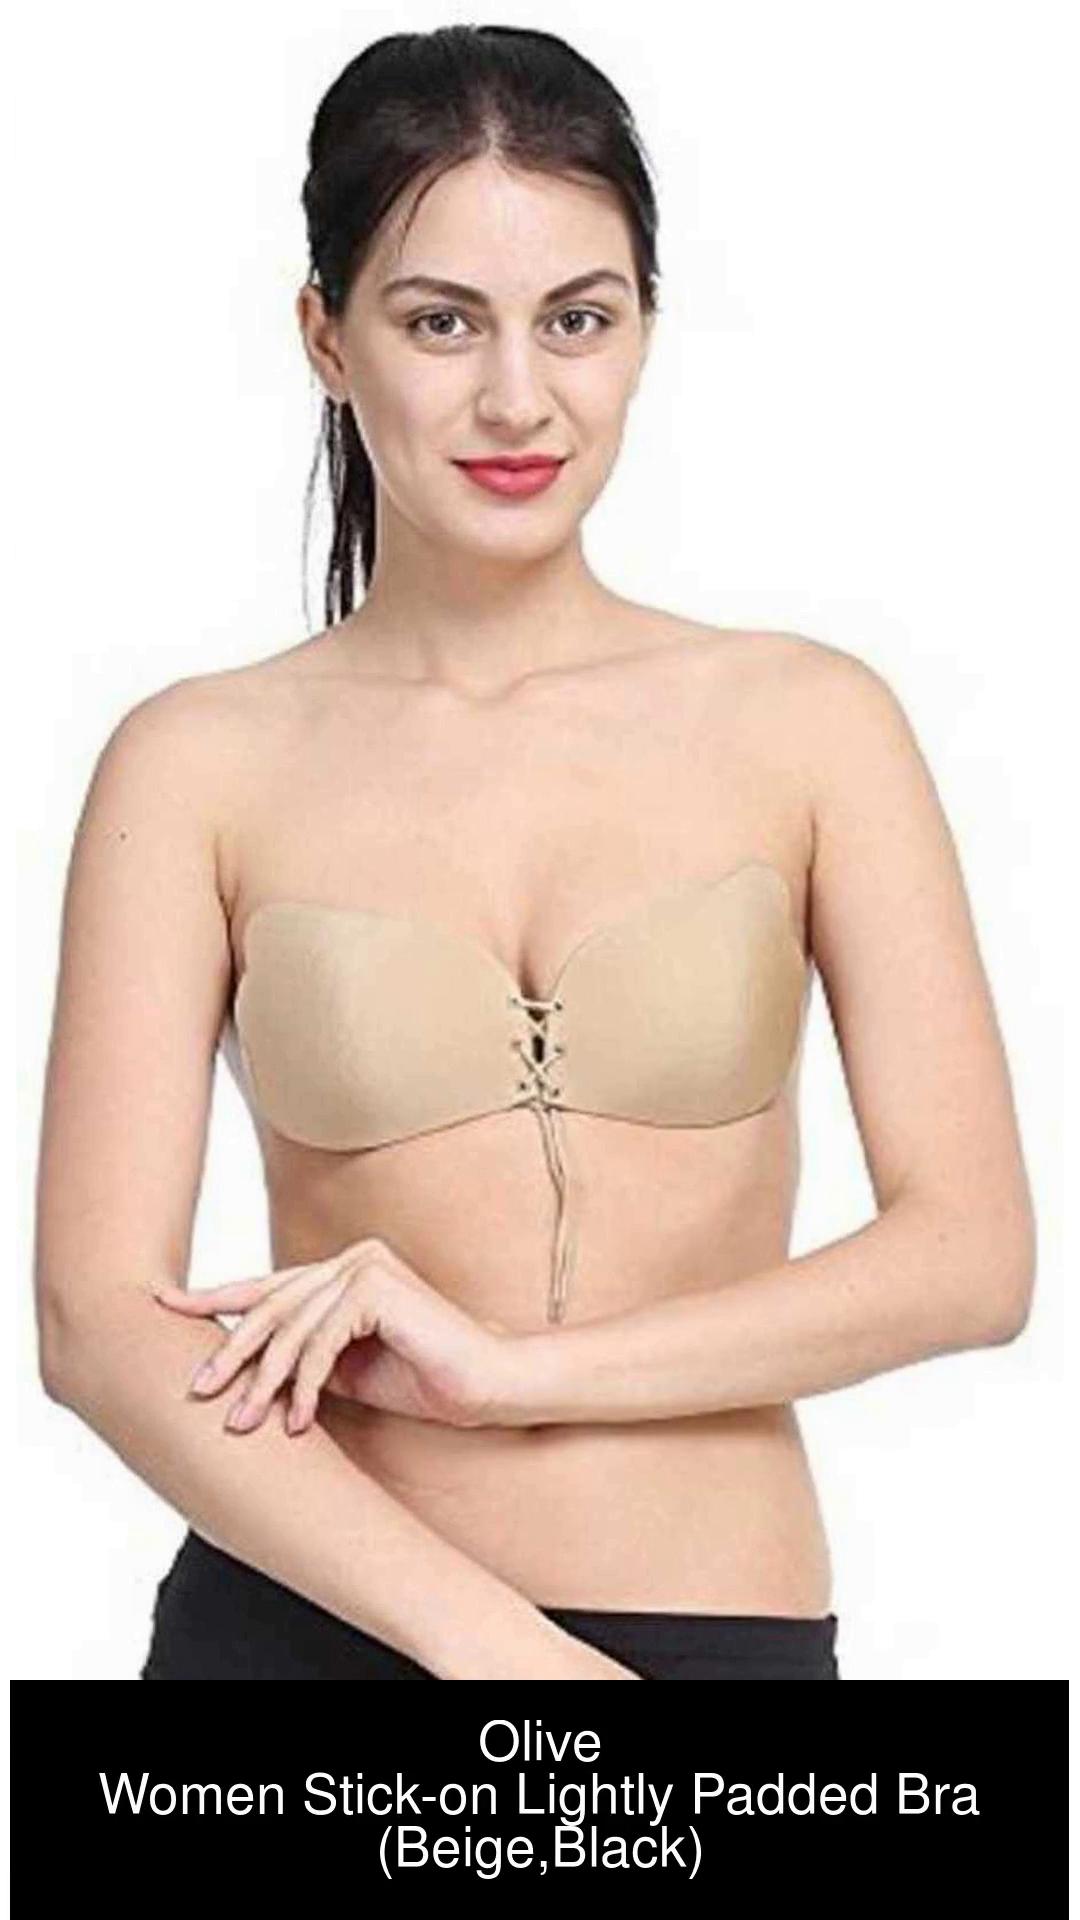 Olive Women's Pull-Up Adhesive Bra Women Stick-on Lightly Padded